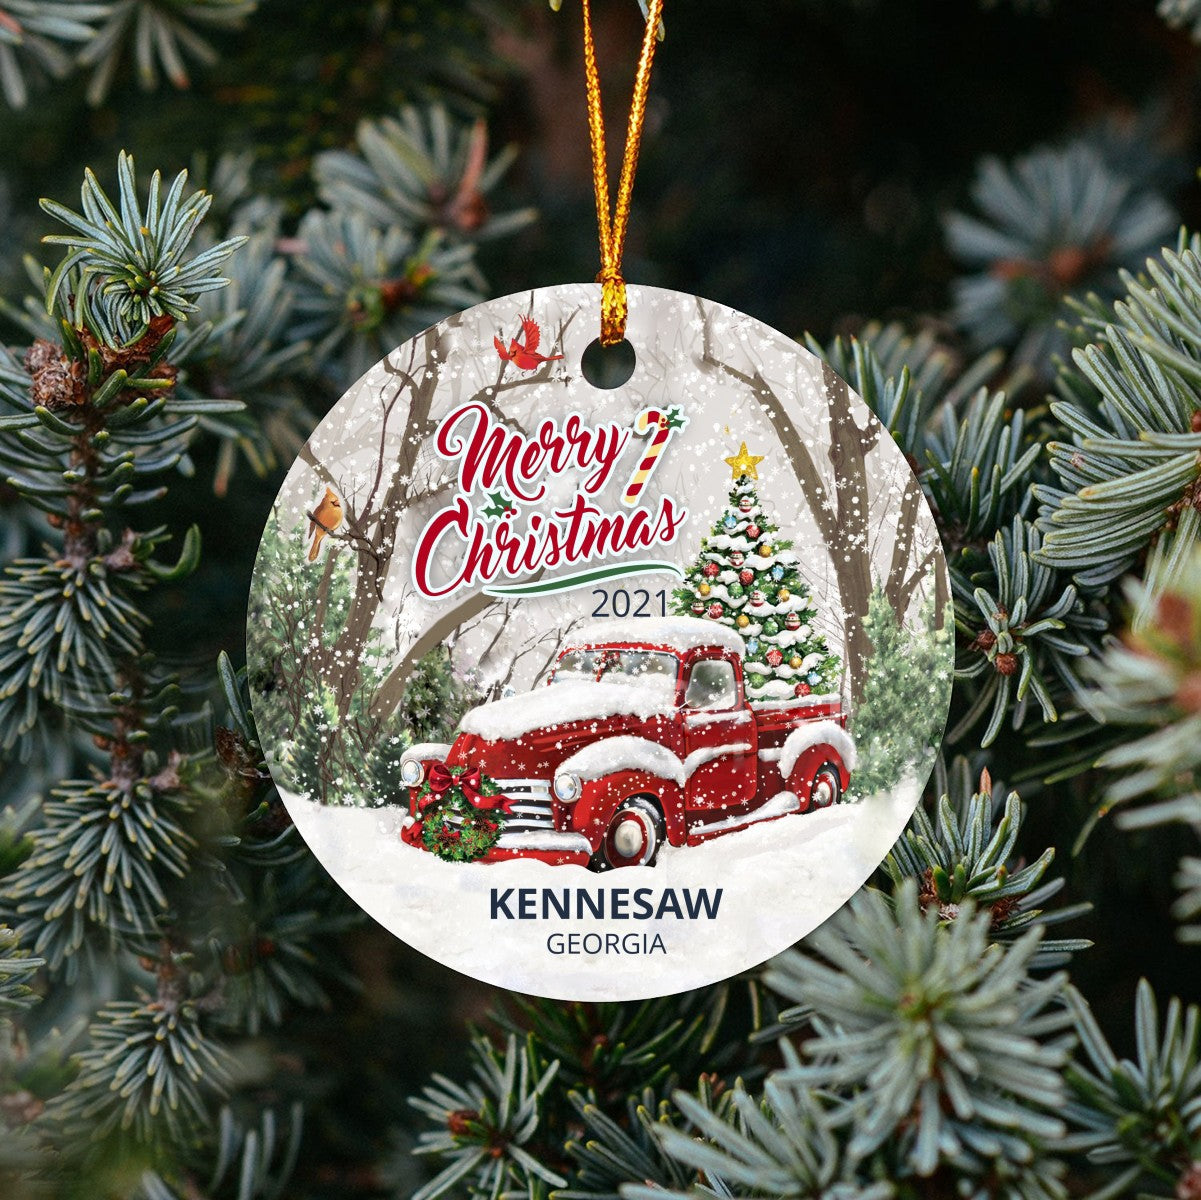 Christmas Tree Ornaments Kennesaw - Ornament Customize With Name City And State Kennesaw Georgia GA - Red Truck Xmas Ornaments 3'' Plastic Gift For Family, Friend And Housewarming